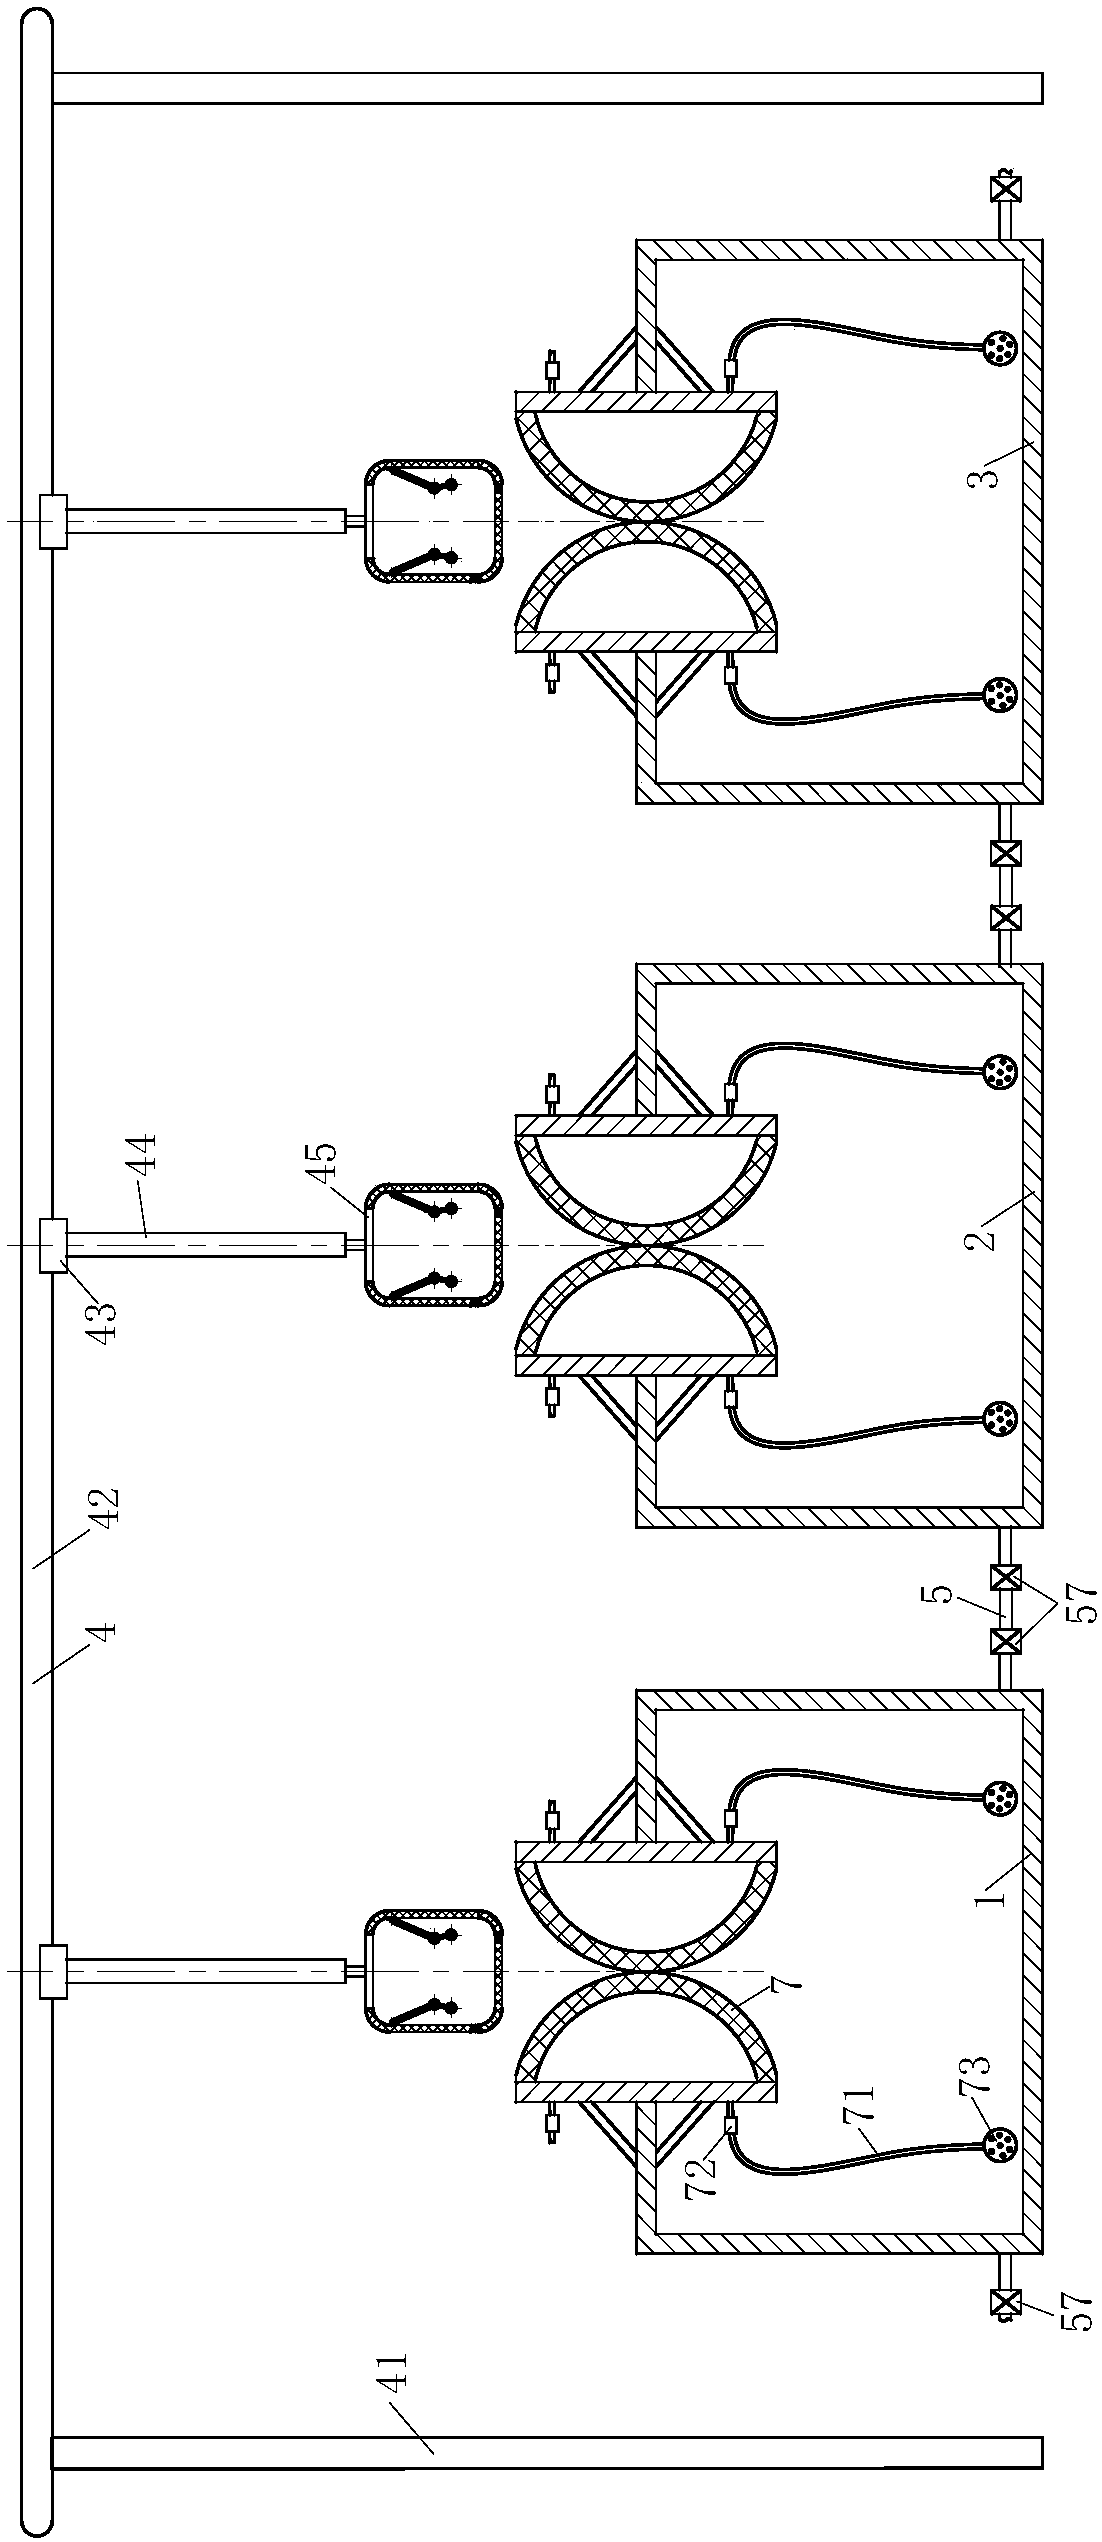 Soaking-extracting-method rose extract extracting system